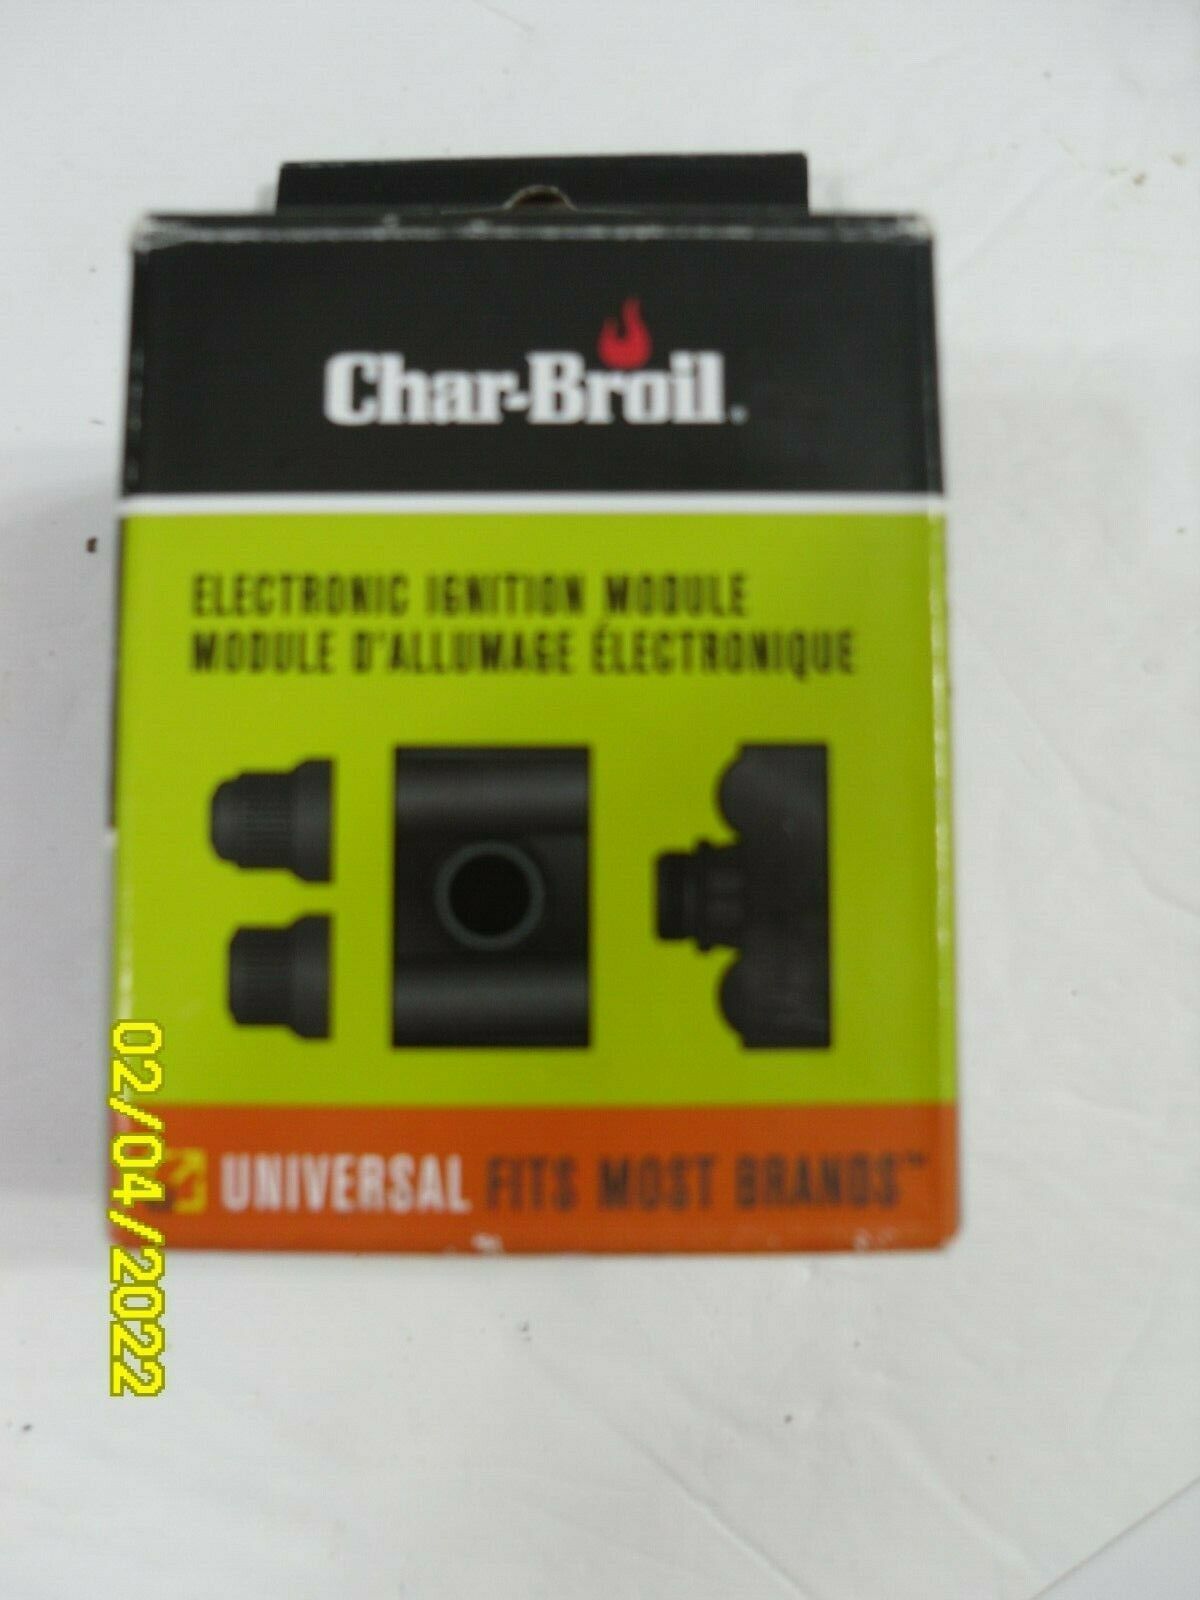 Char-Broil Universal Electronic Ignition Module Fits Most Brands - $12.49